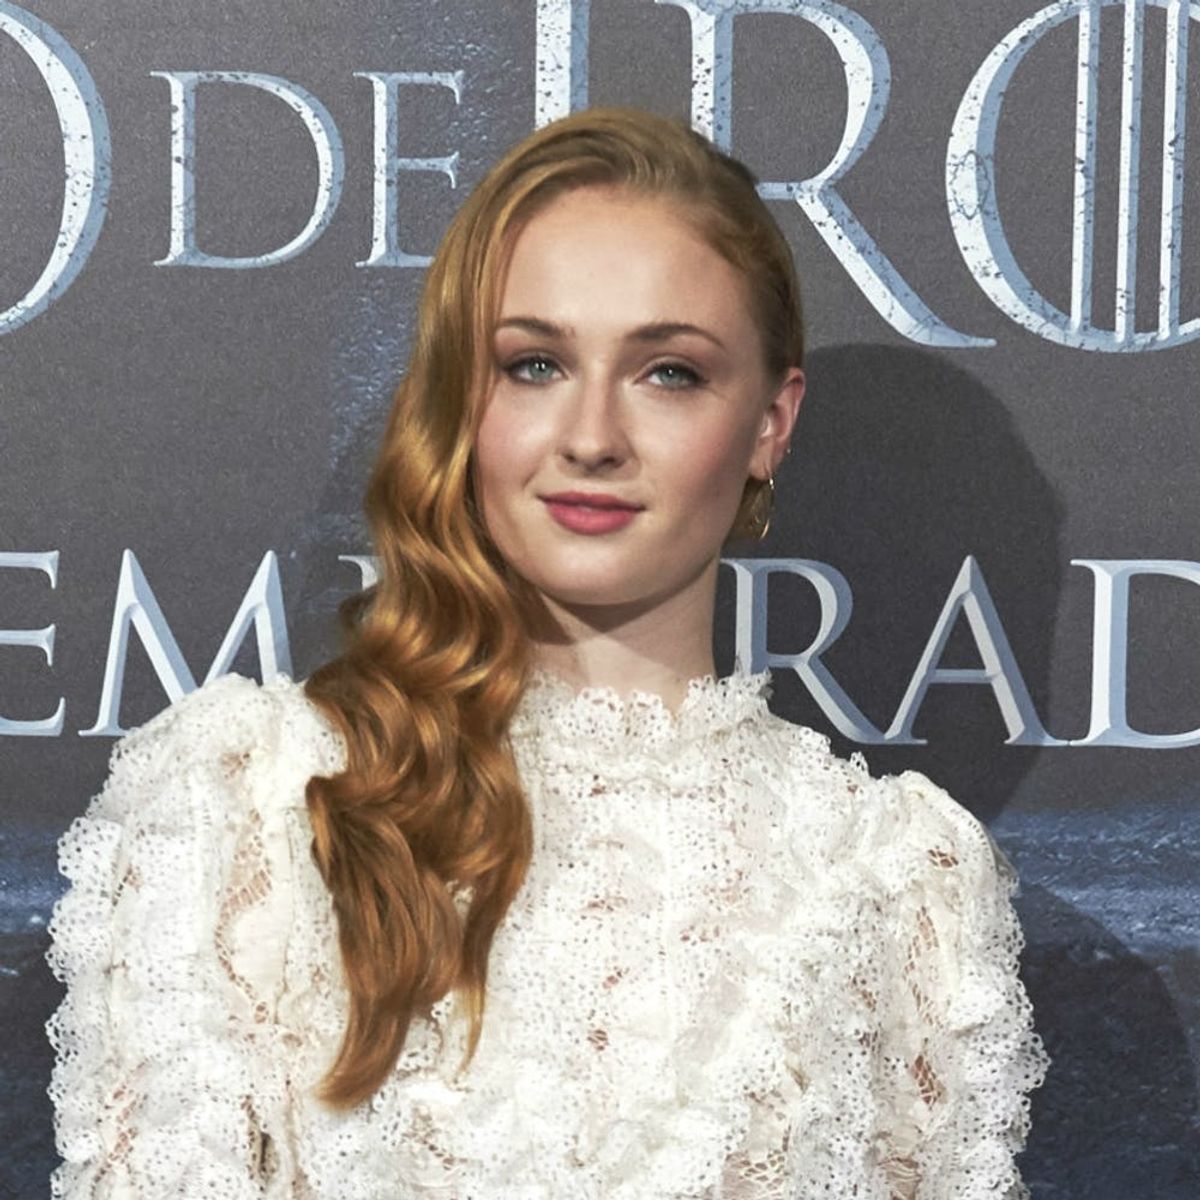 Game of Thrones Star Sophie Turner Is Hardly Recognizable With Her Natural Blonde Hair